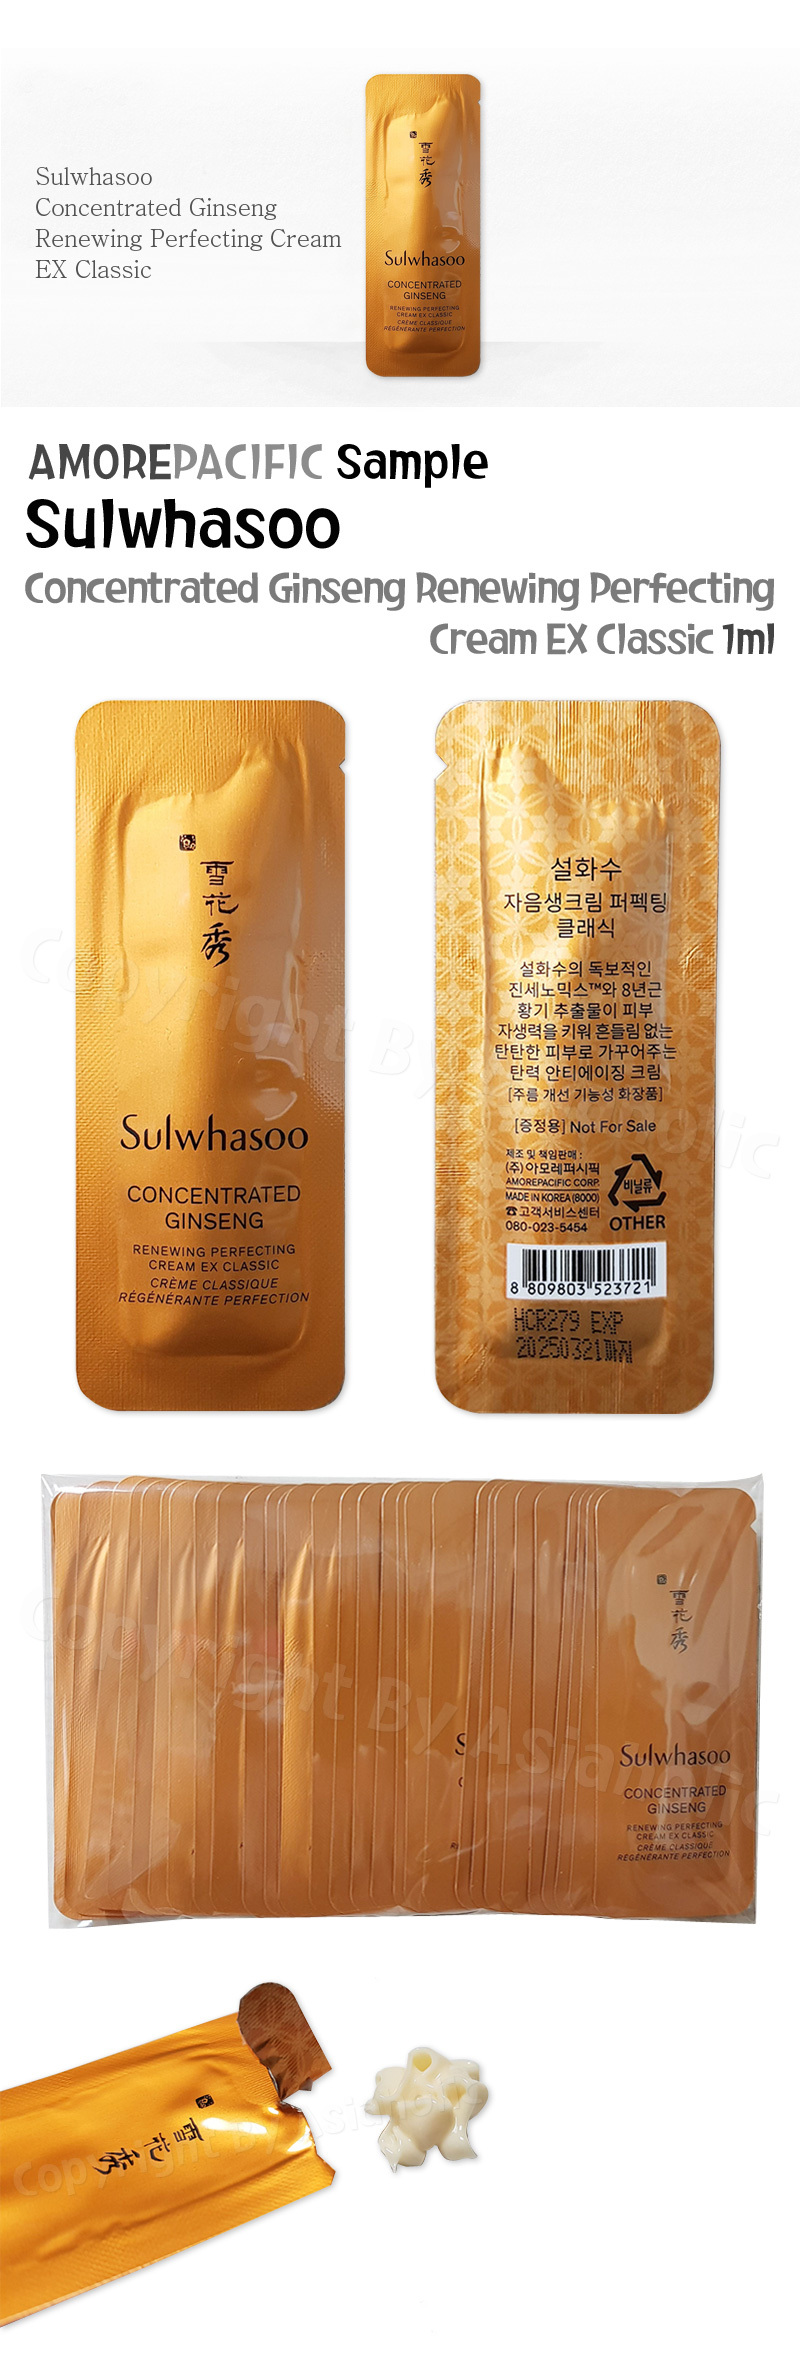 Sulwhasoo Concentrated Ginseng Renewing Perfecting Cream EX Classic 1ml x 10pcs (10ml) Sample Newest Version